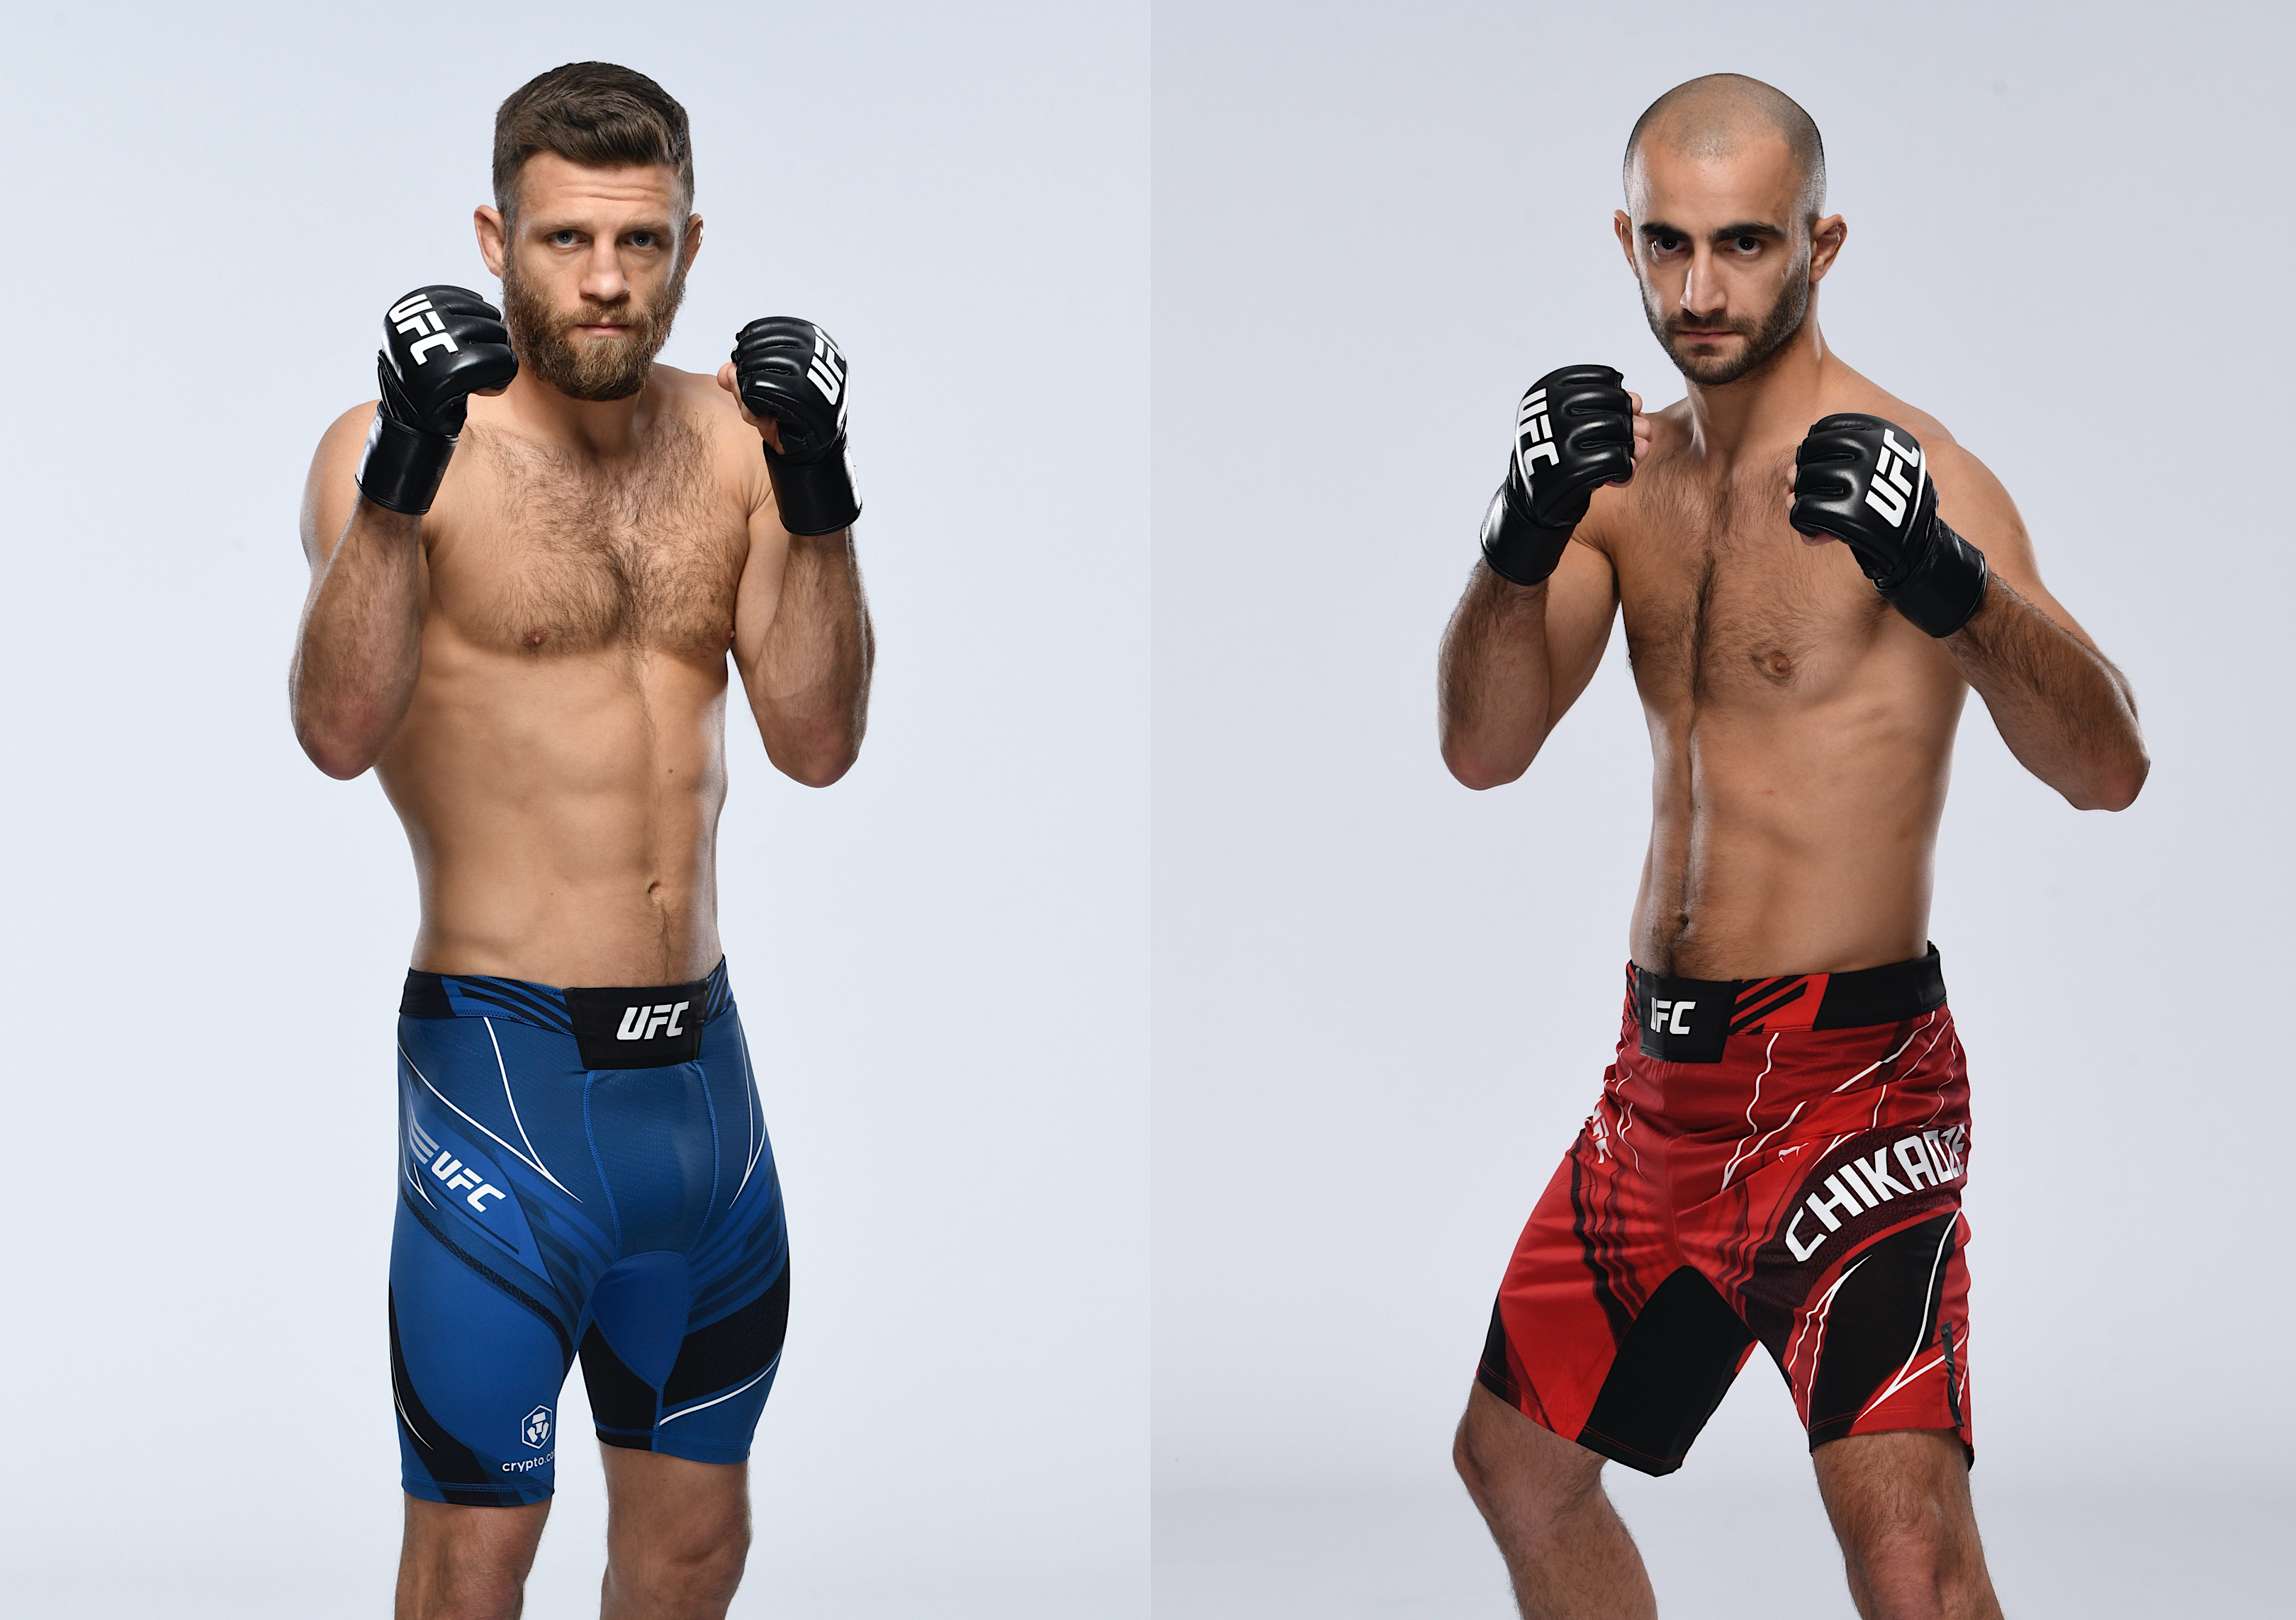 UFC Vegas 46 Kattar vs Chikadze live stream, odds, actual fight time, card, results, how to watch online with ESPN Plus (1/15/22)